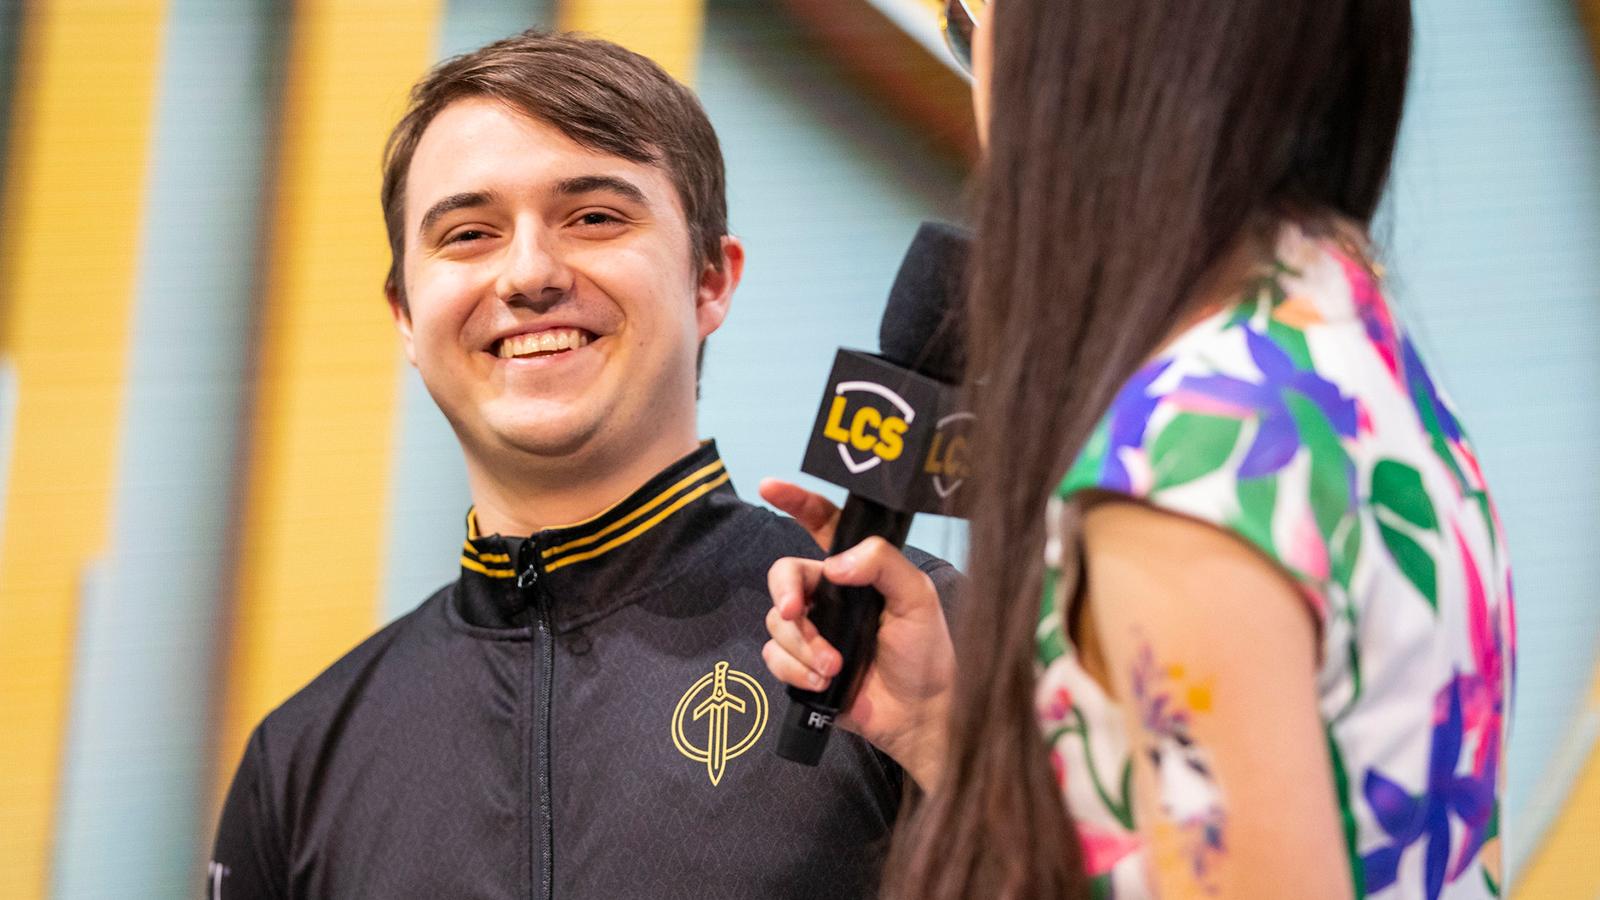 Ablazeolive playing for Golden Guardians Academy in LCS 2020